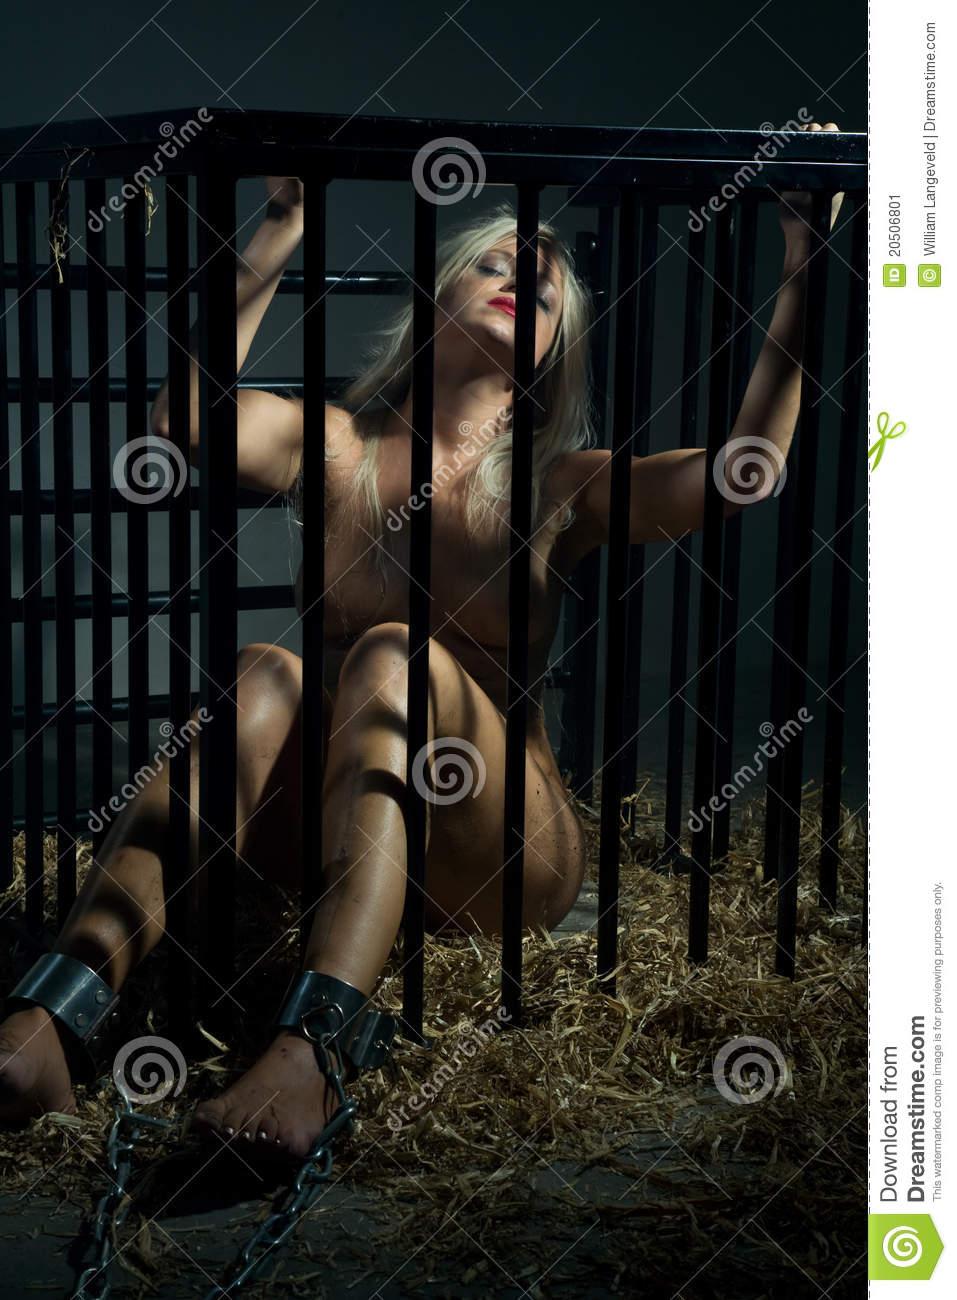 Nude women in cages